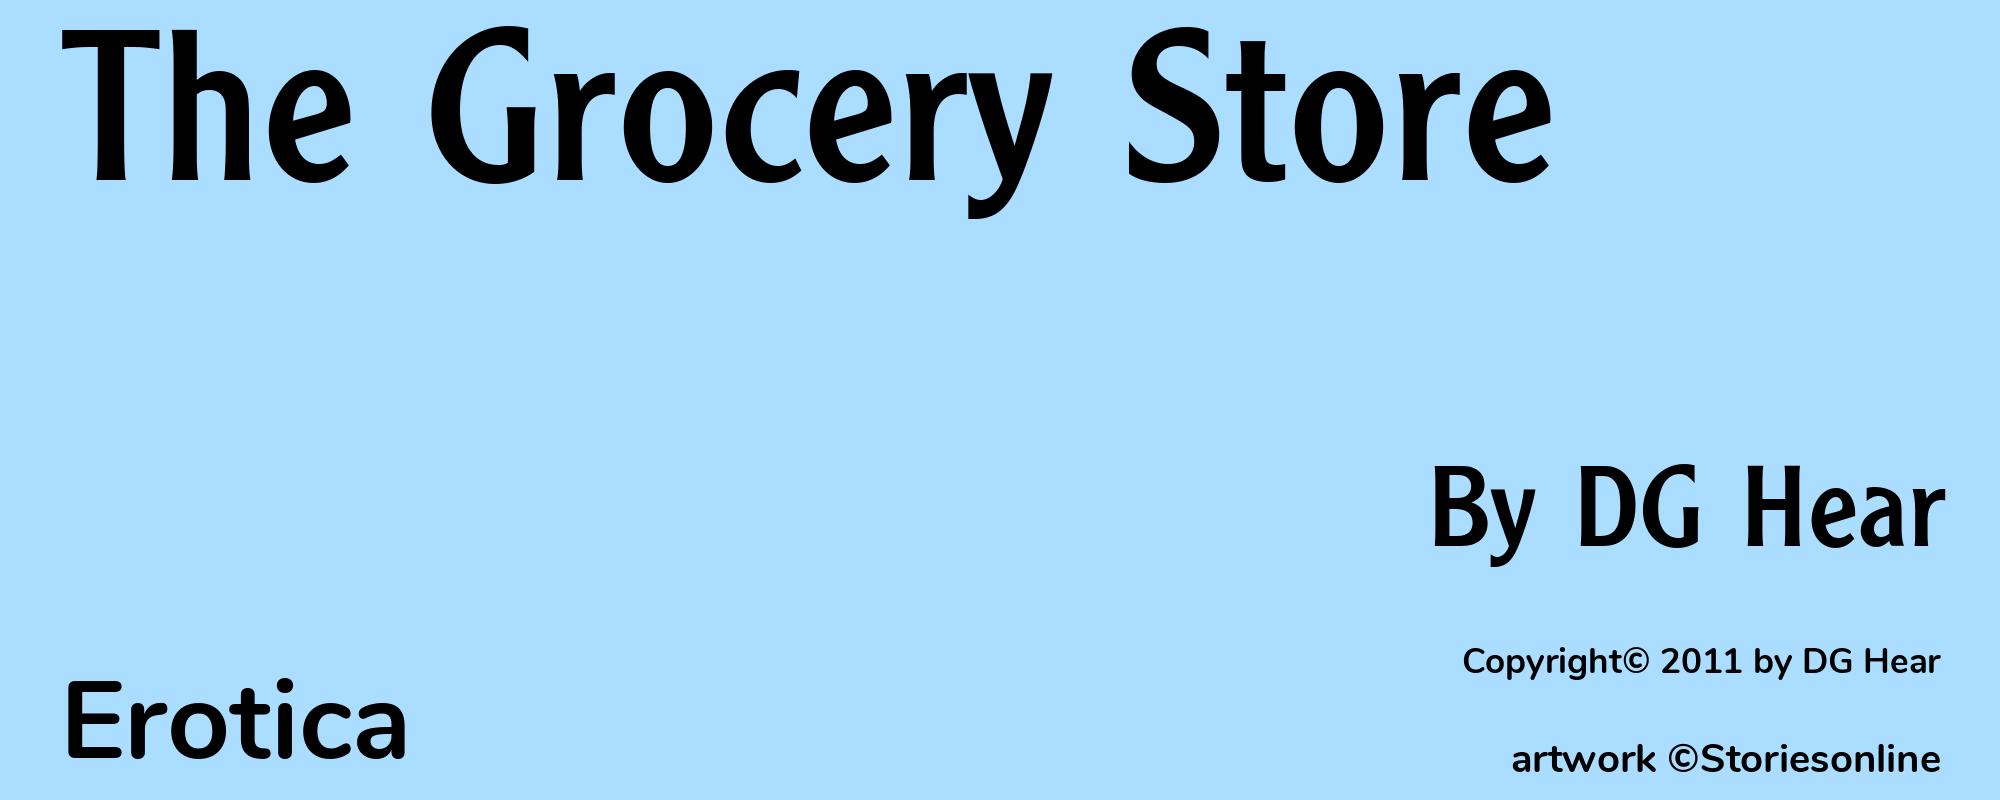 The Grocery Store - Cover